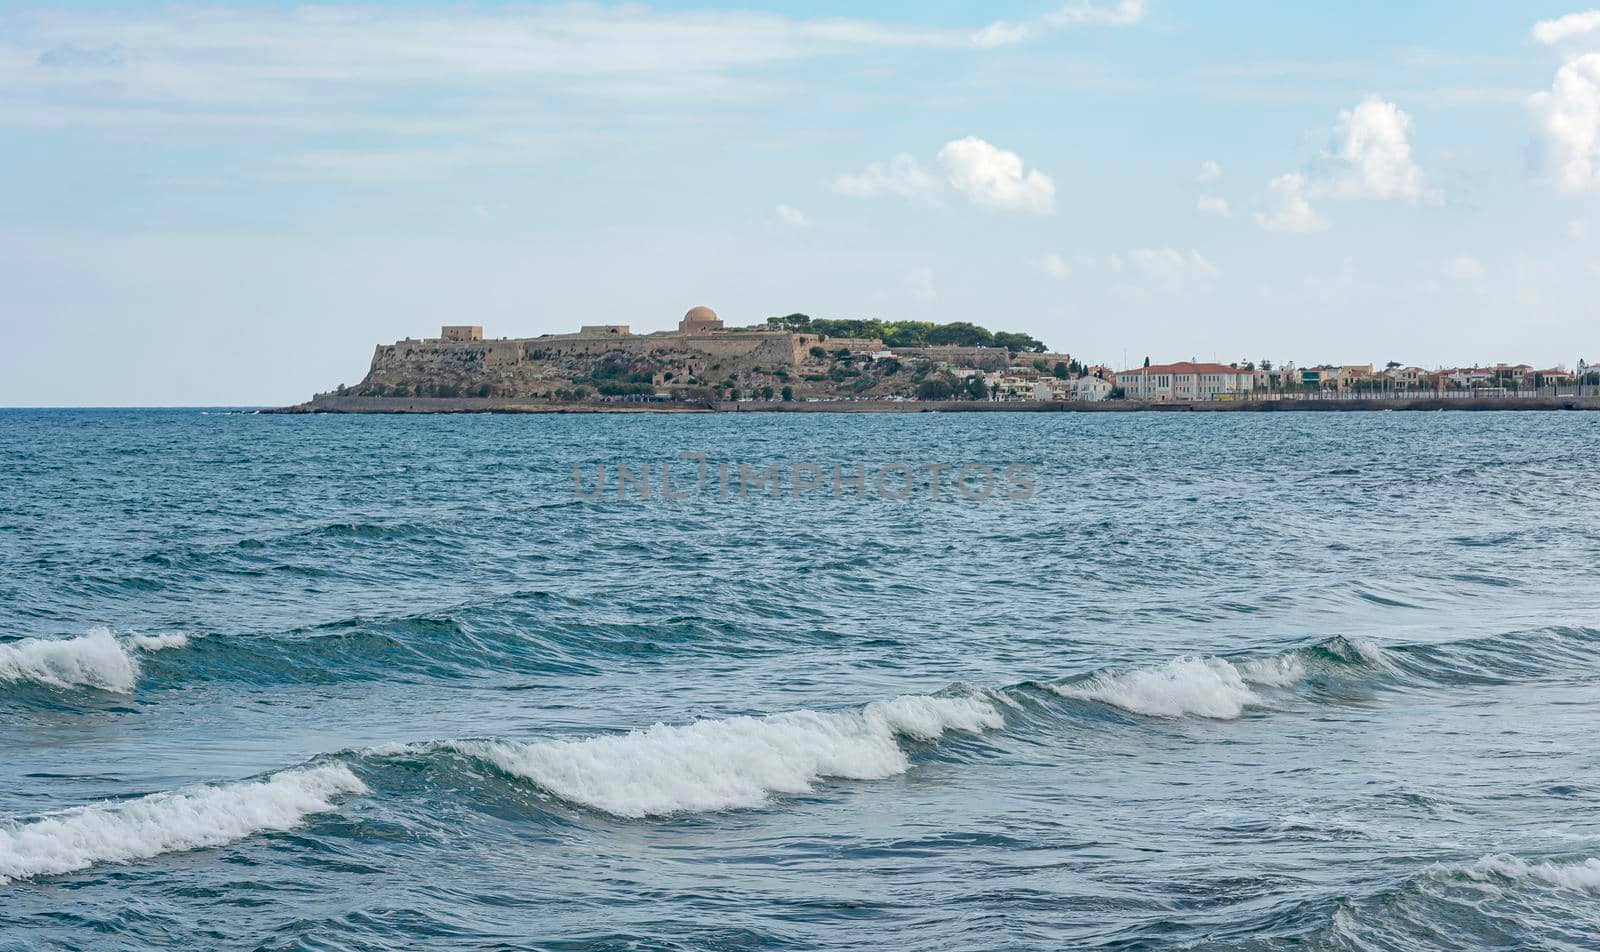 Seascape. Fortress and old town on the coast (Greece, Crete, Rethymno) by Grommik